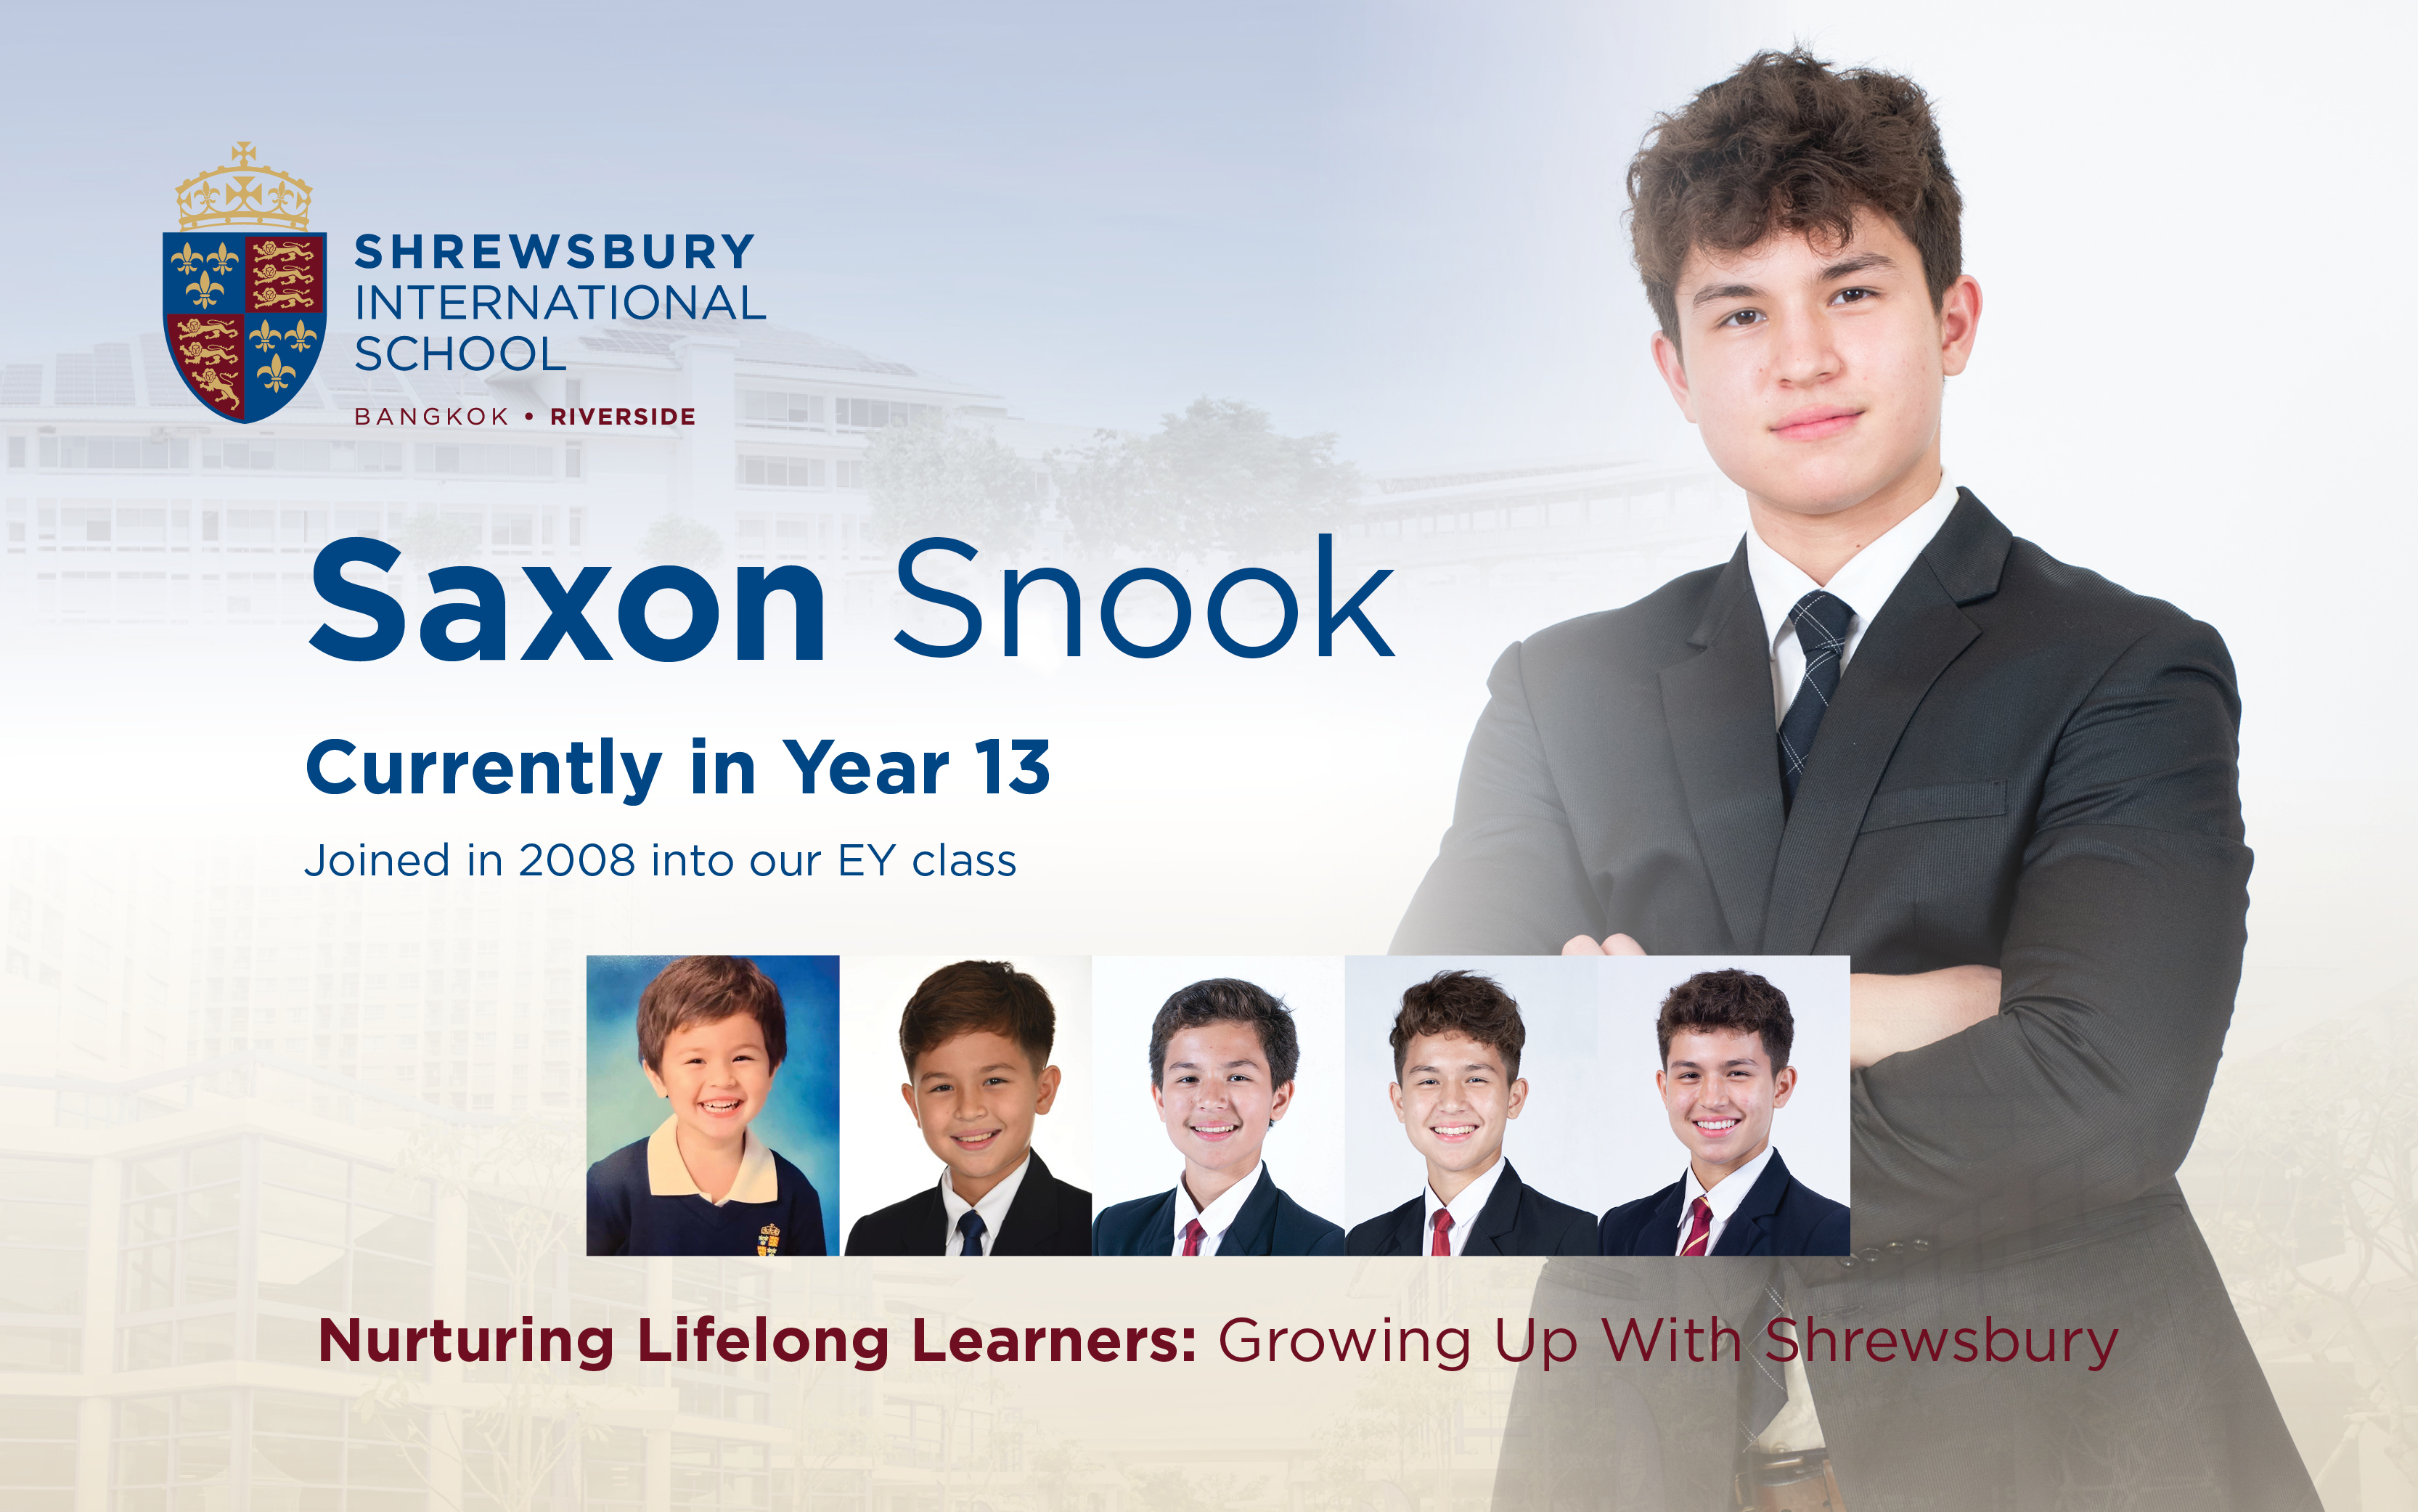 Saxon joined Shrewsbury in 2008 in our EY class. 